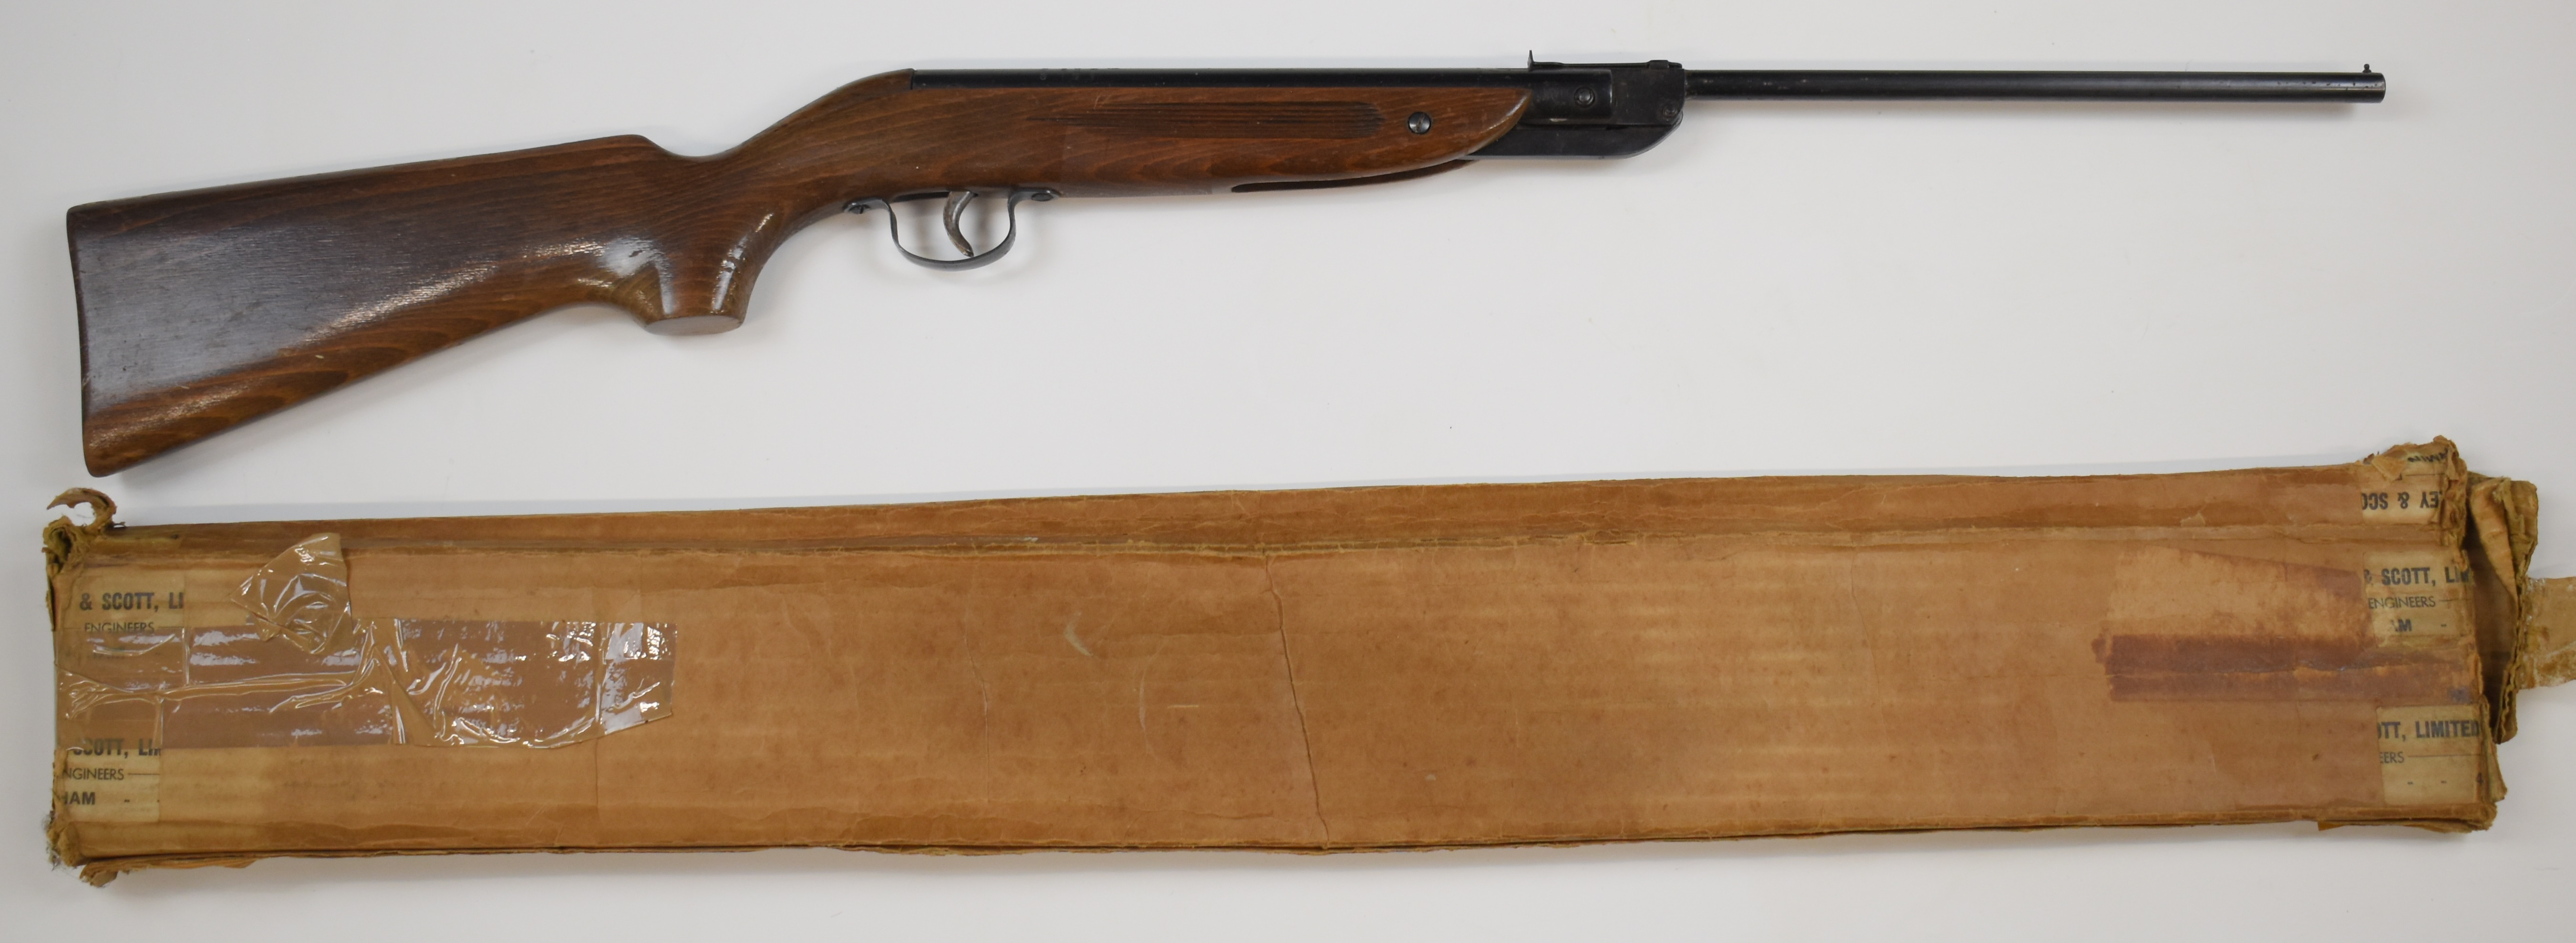 Webley Ranger .177 air rifle with semi-pistol grip and adjustable sights, NVSN, in original box. - Image 3 of 8